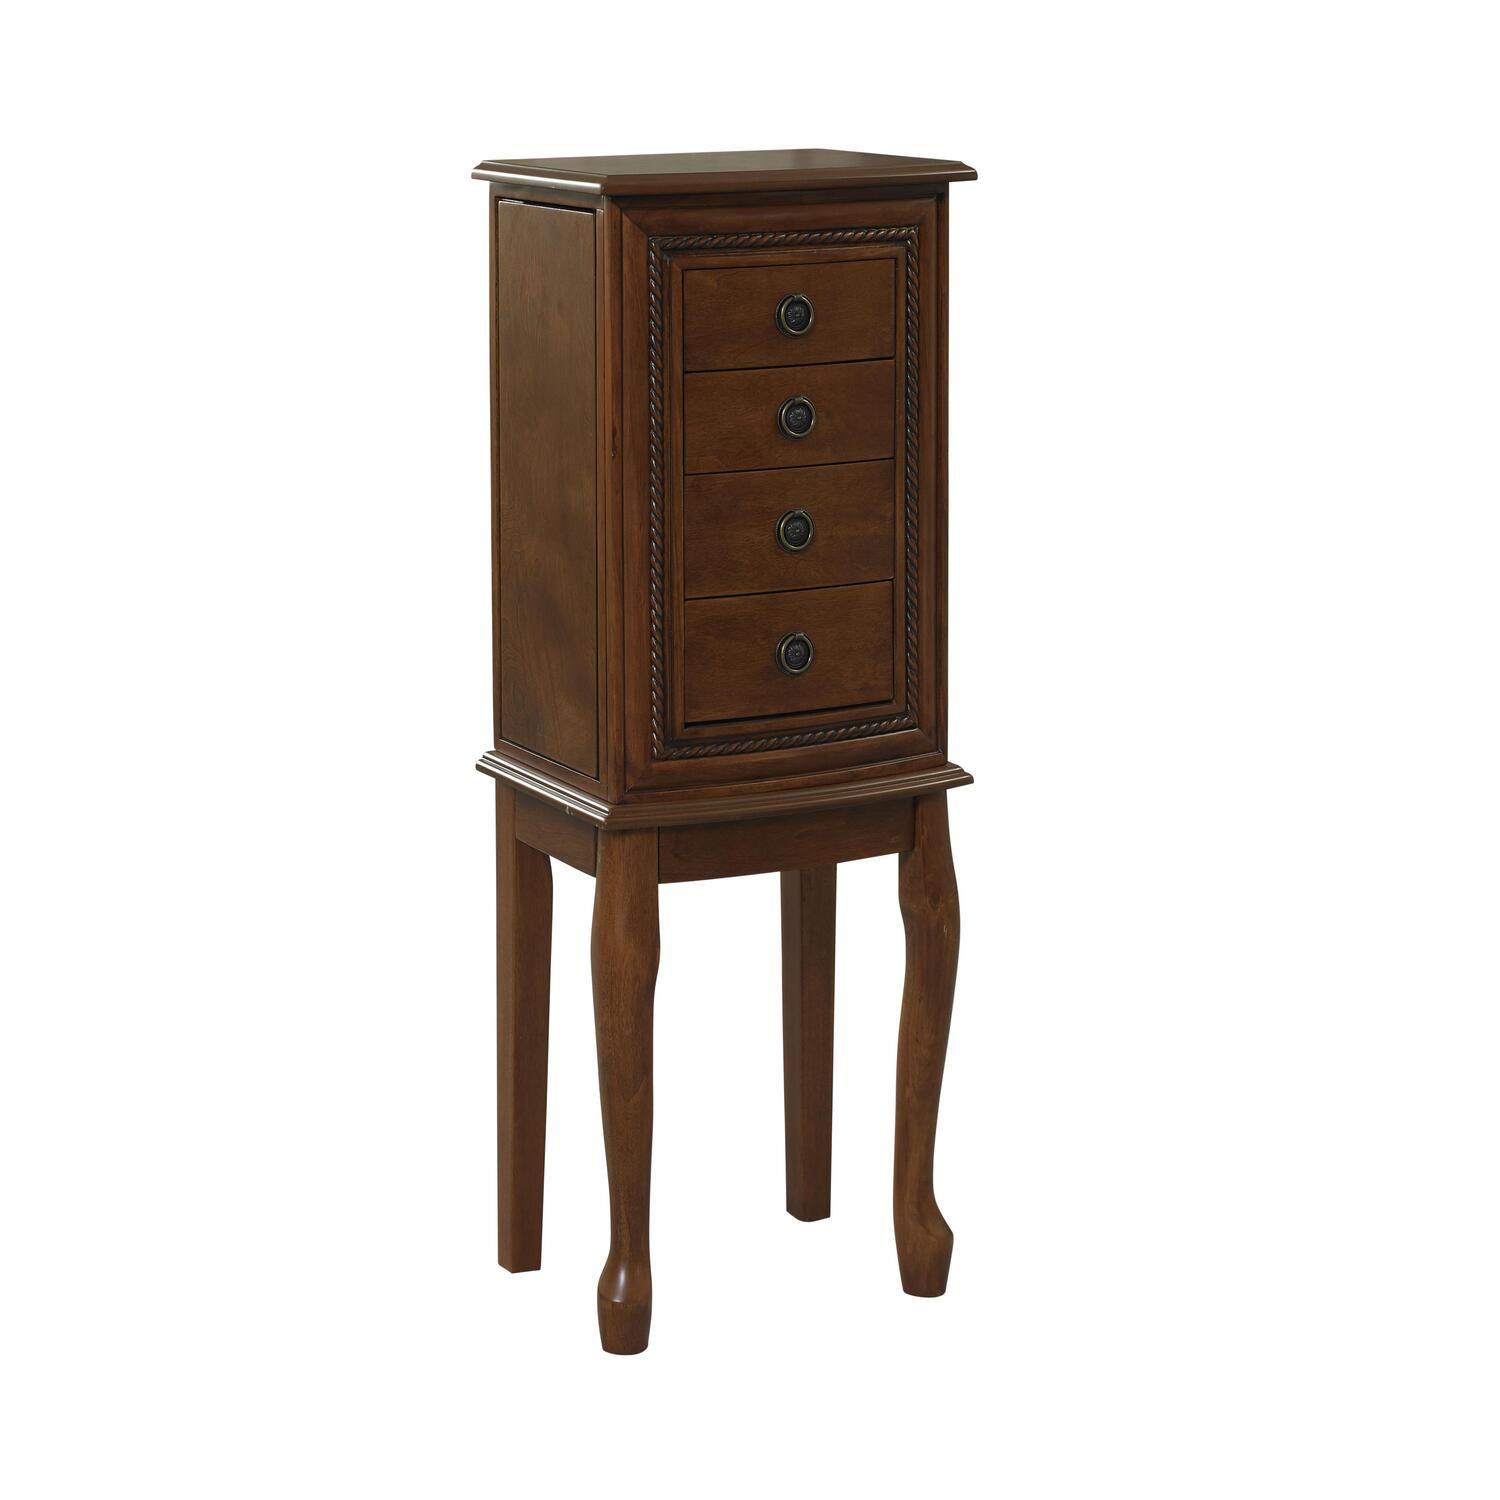 Grace Jewelry Armoire - image 1 of 2